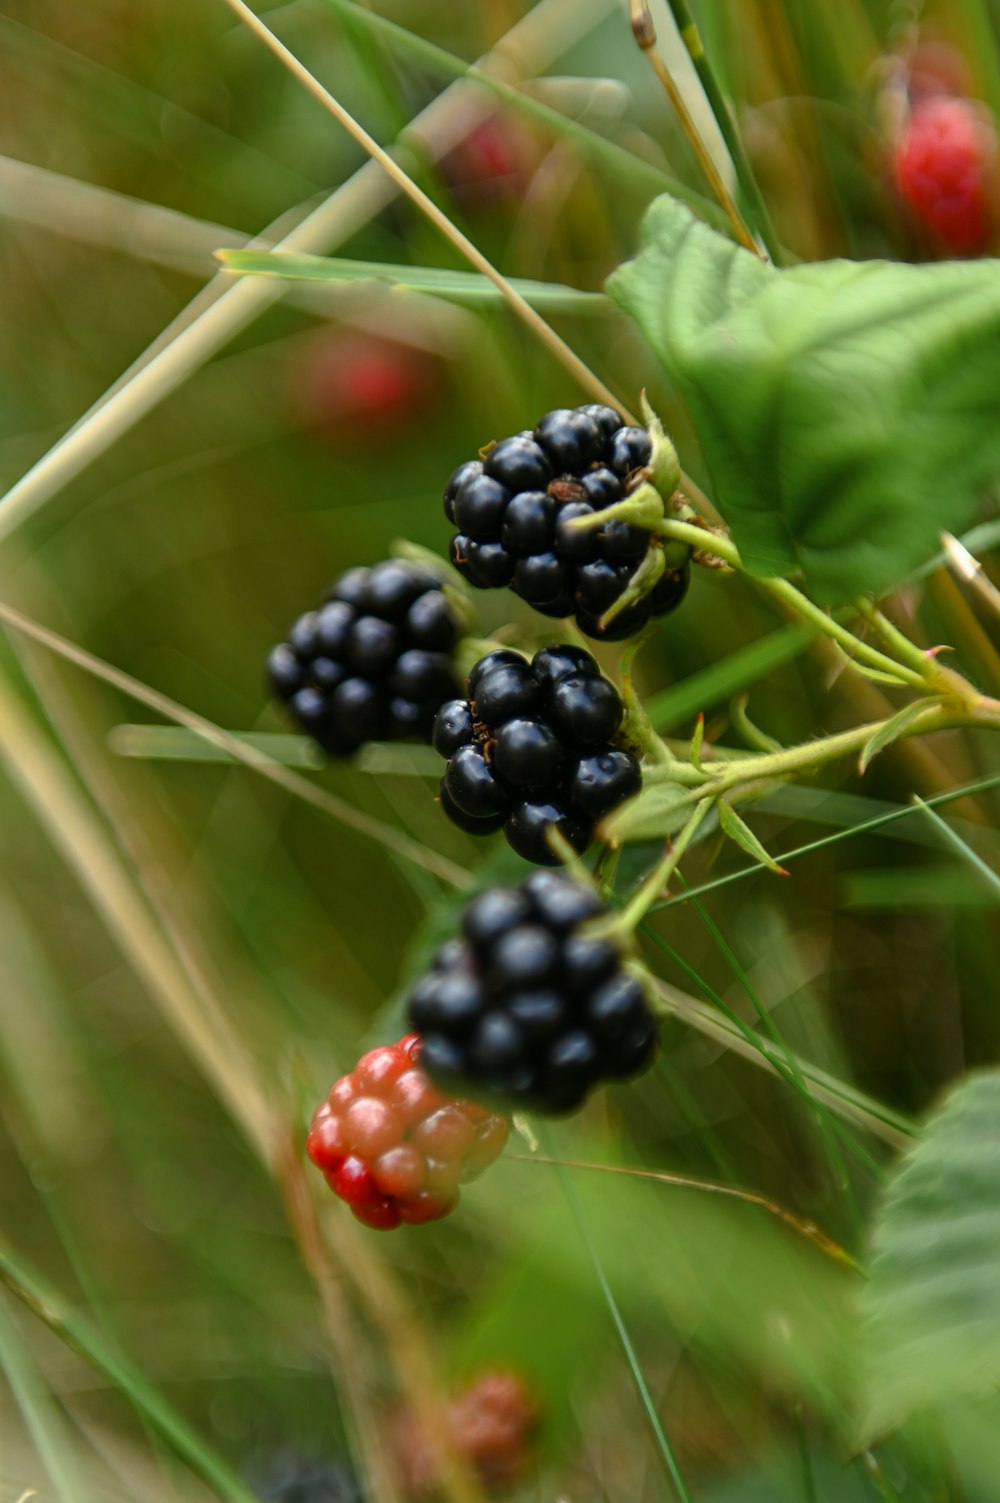 a close up of berries on a plant